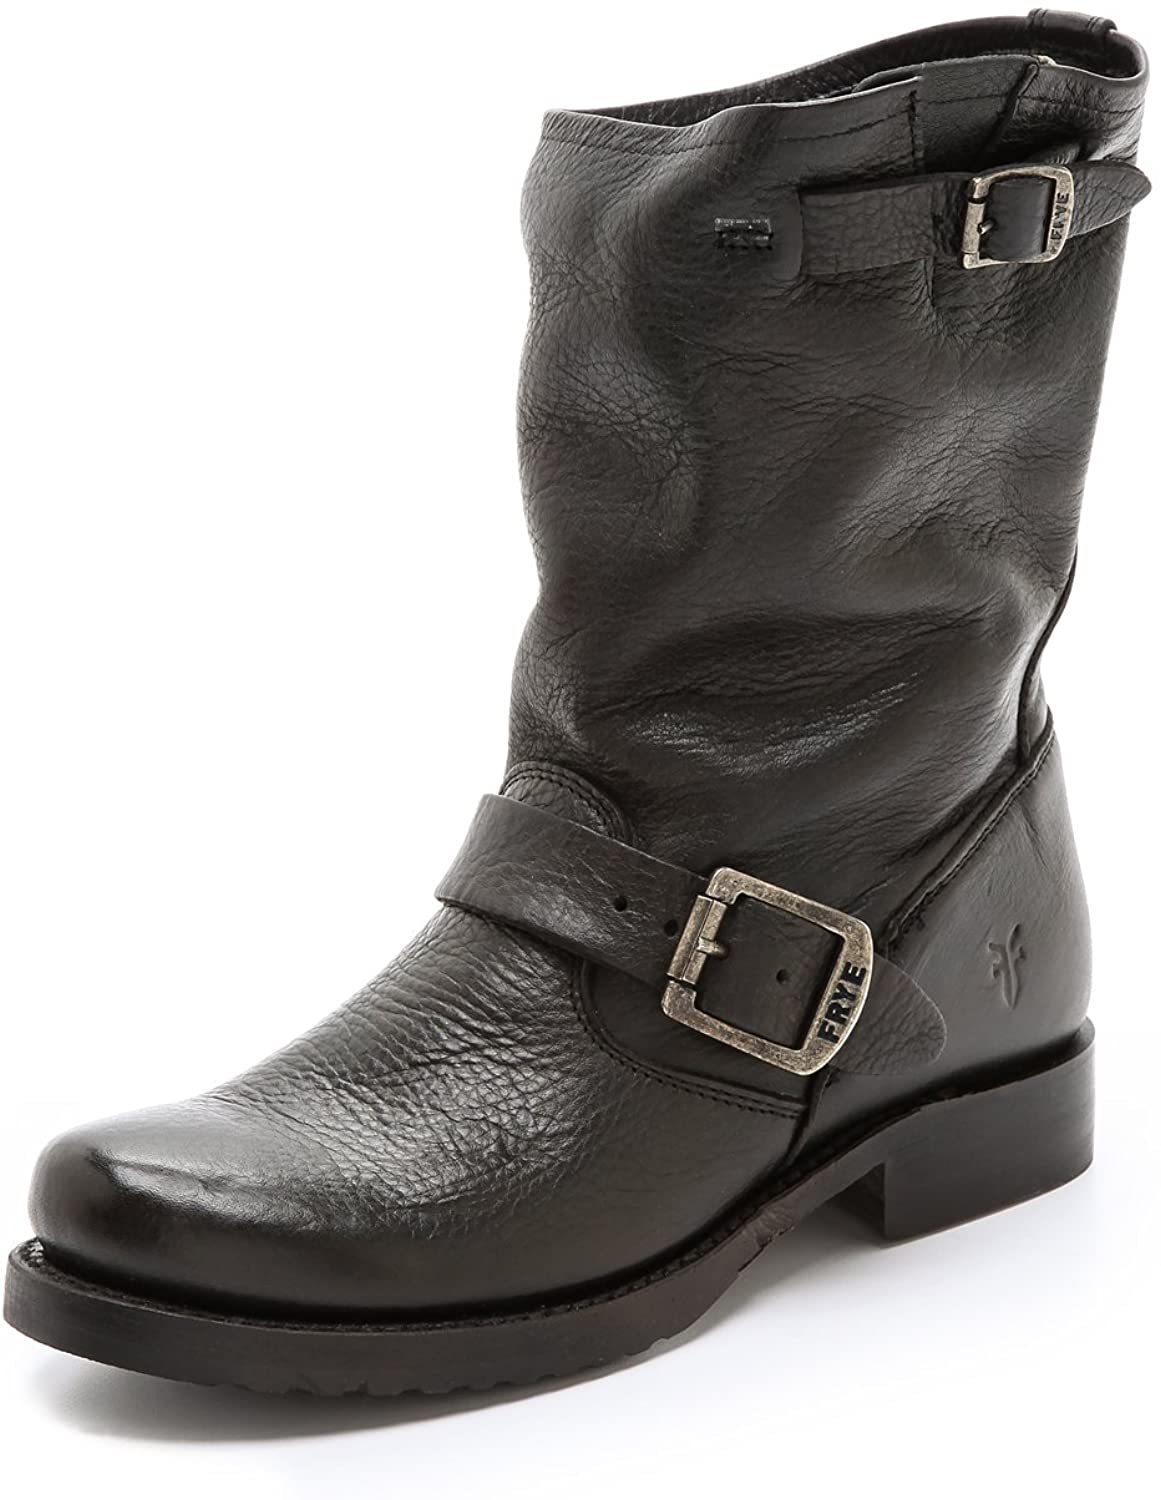 Women's Veronica Short Boot Black from front view